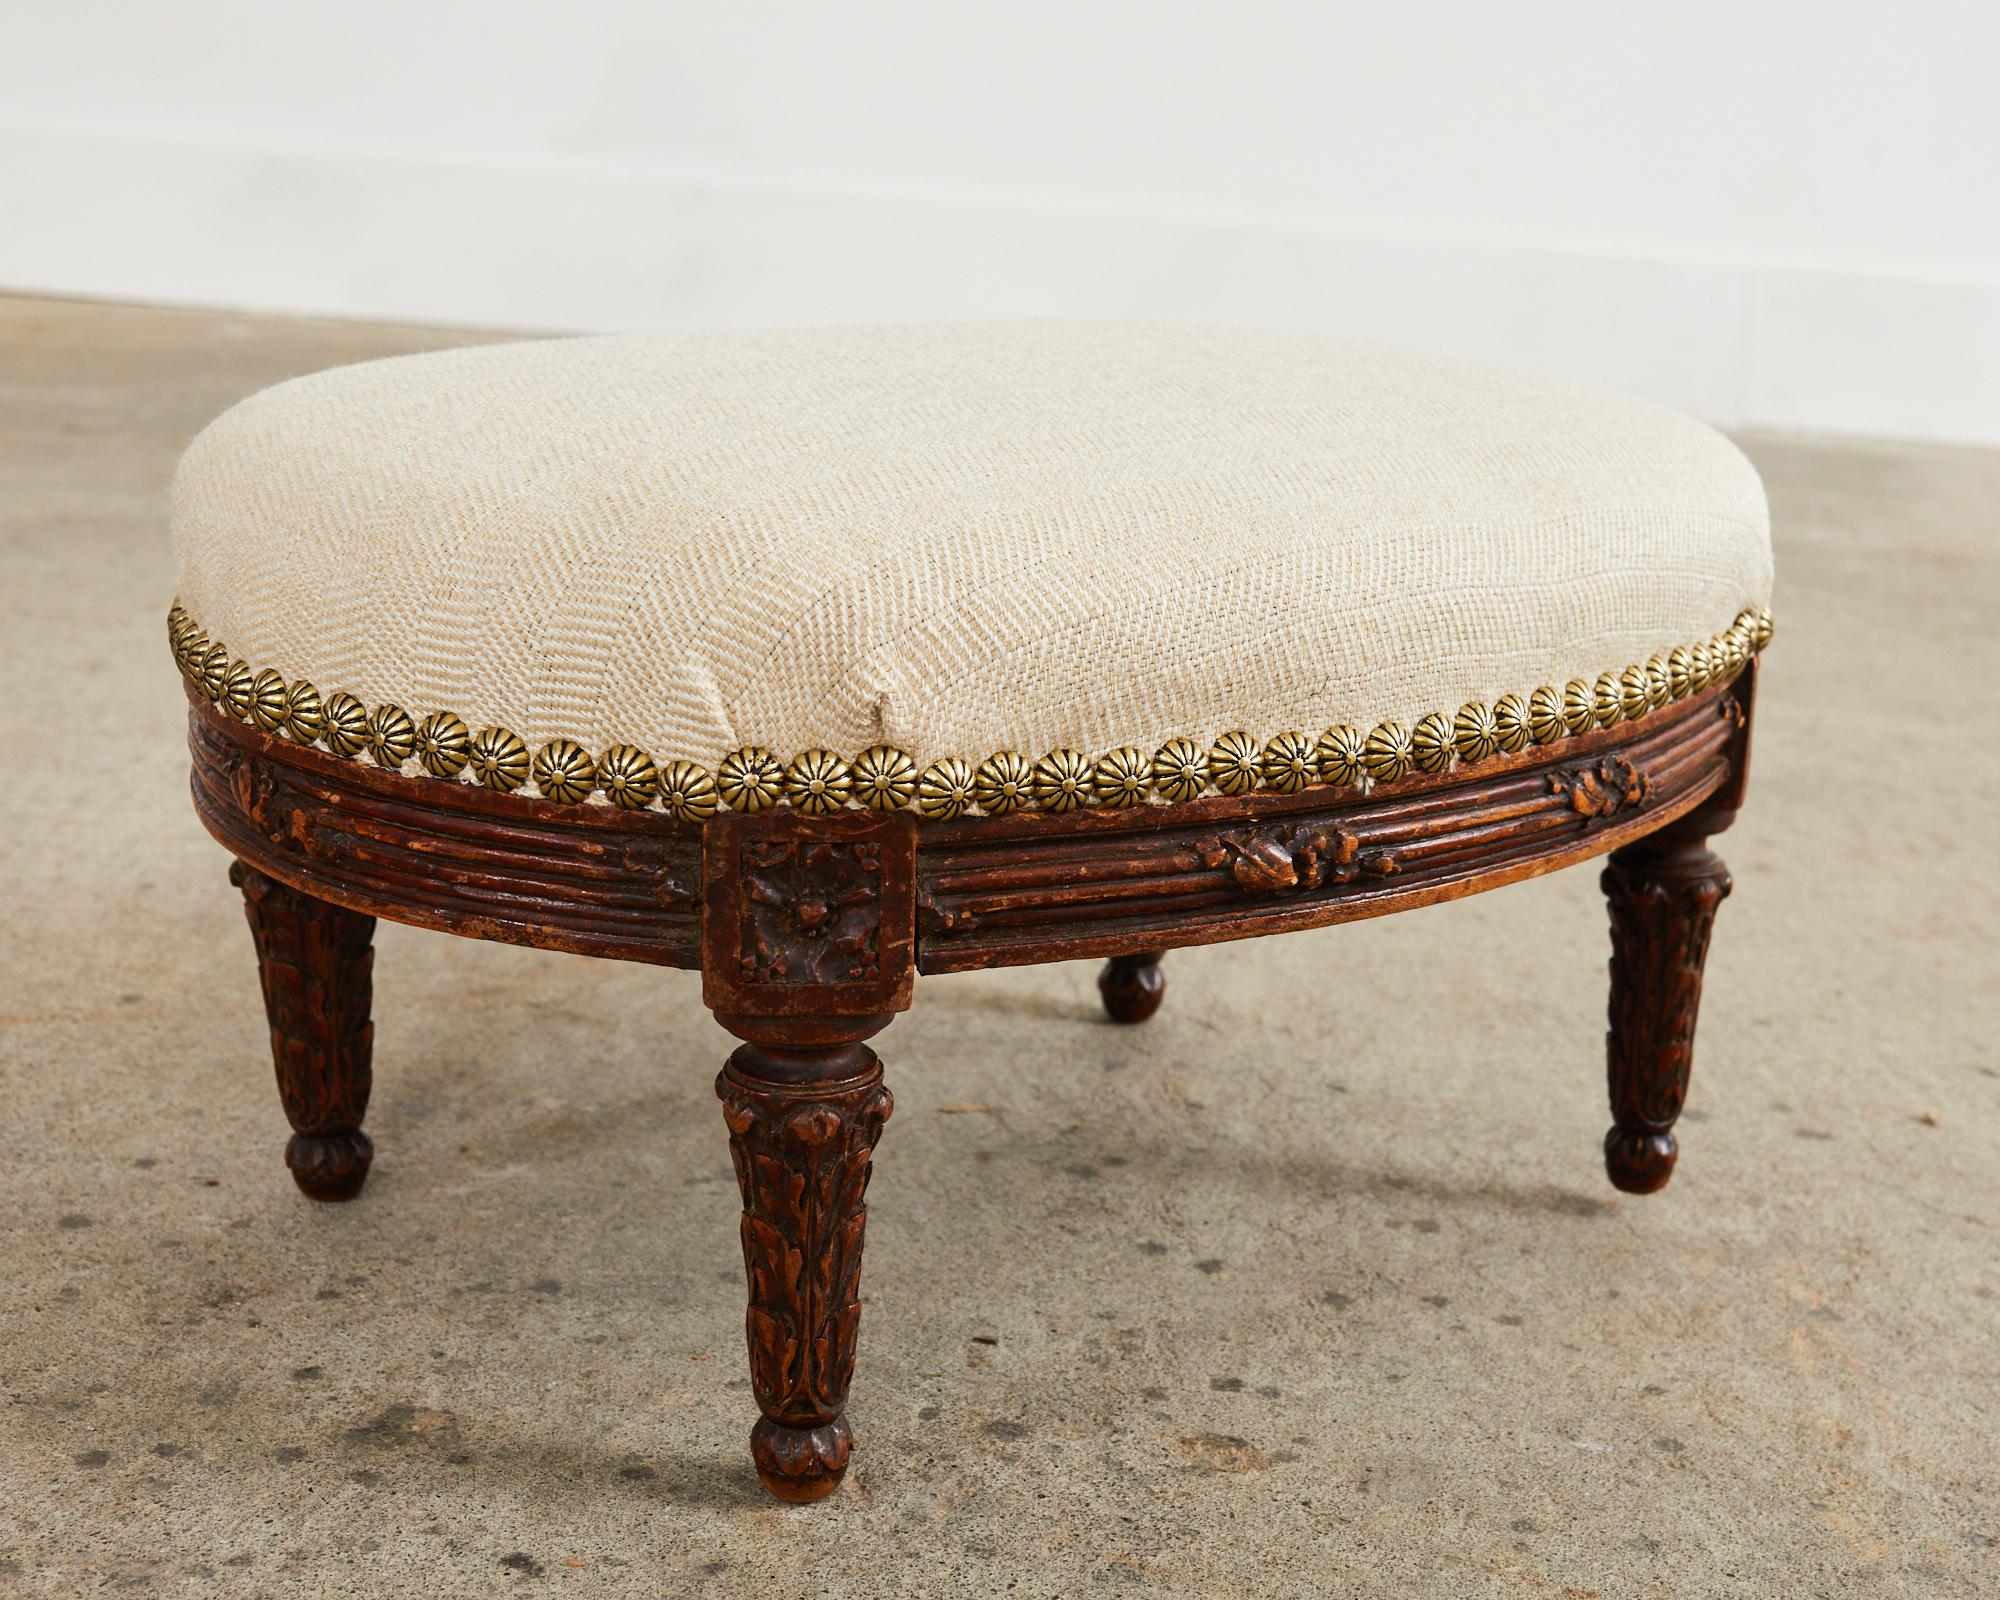 18th Century and Earlier 18th Century French Louis XVI Diminutive Mahogany Footstool For Sale